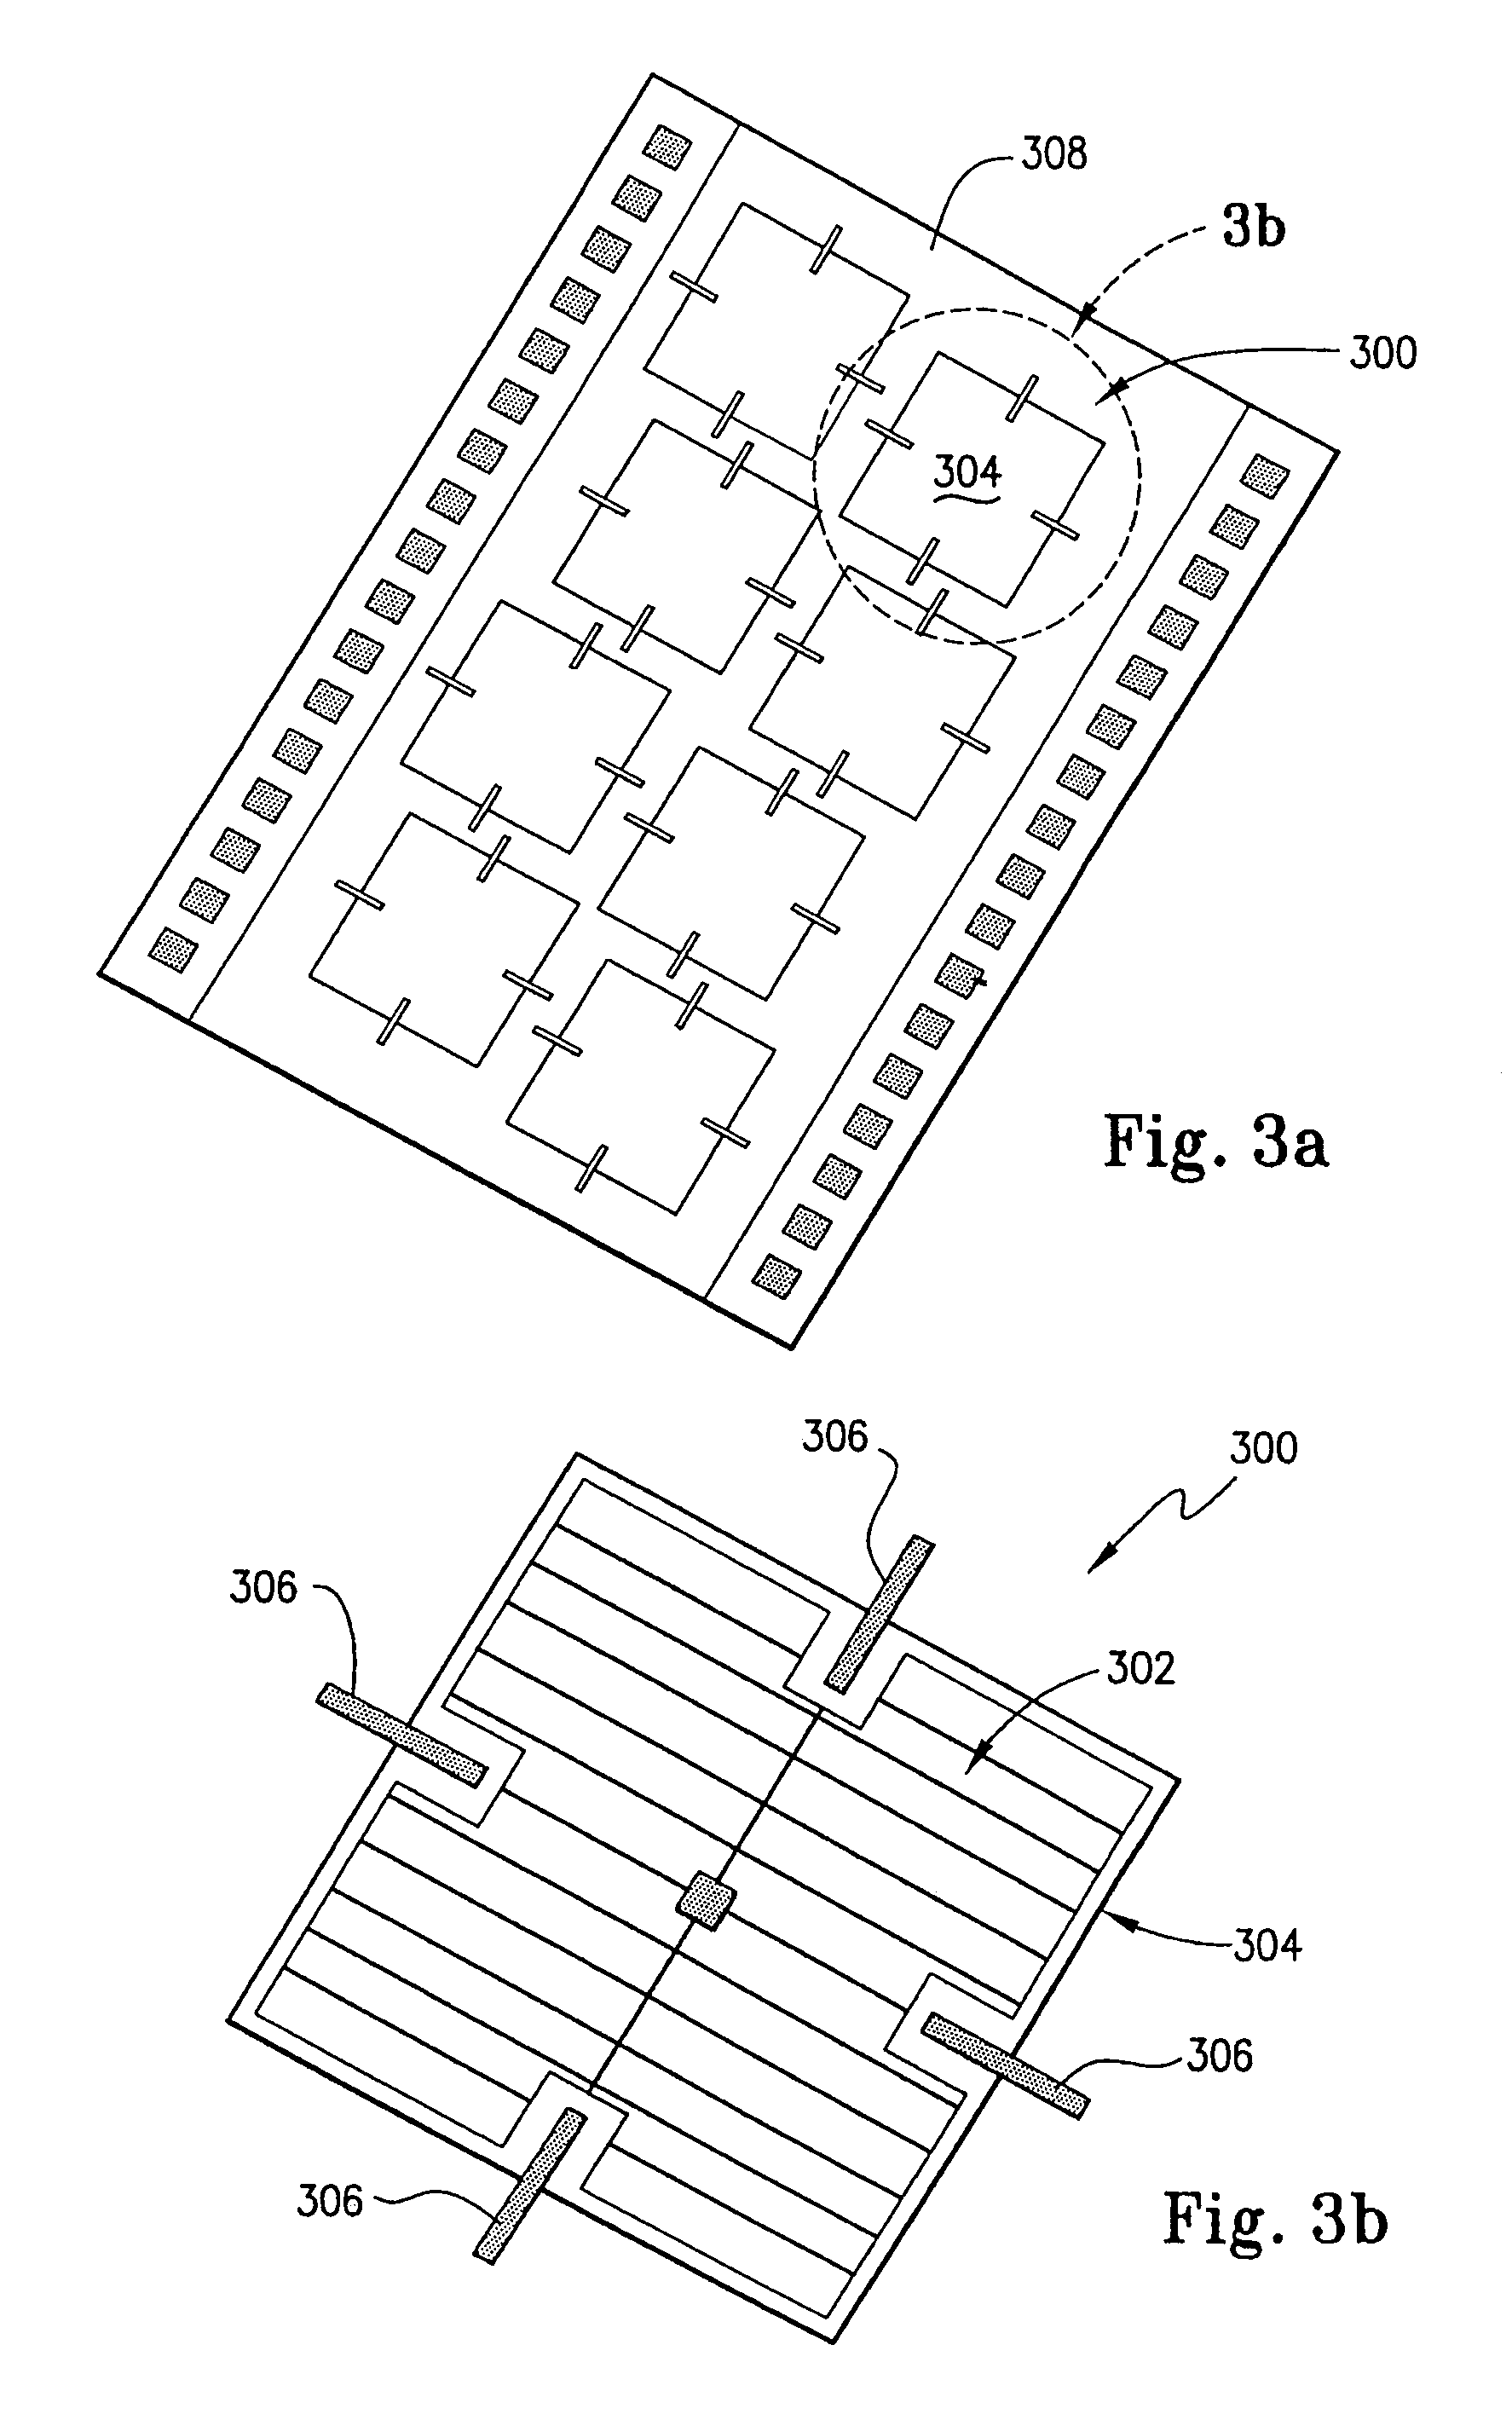 Electrical memory component and a method of construction thereof